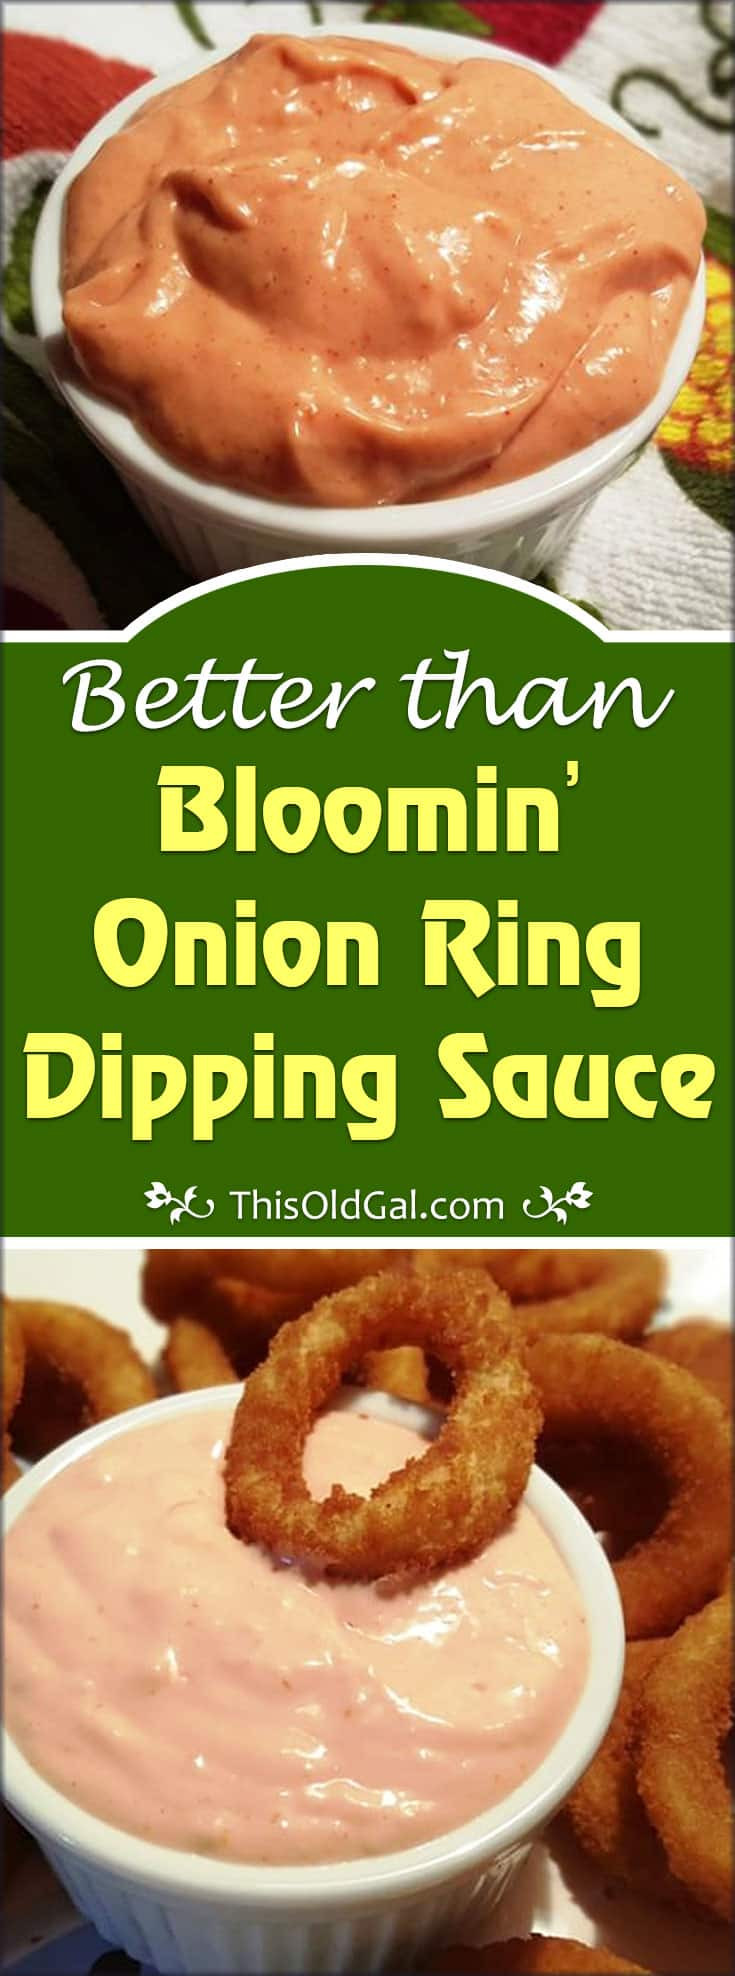 Bloomin Onion Sauce Recipe
 Better than Bloomin ion Ring Dipping Sauce Recipe